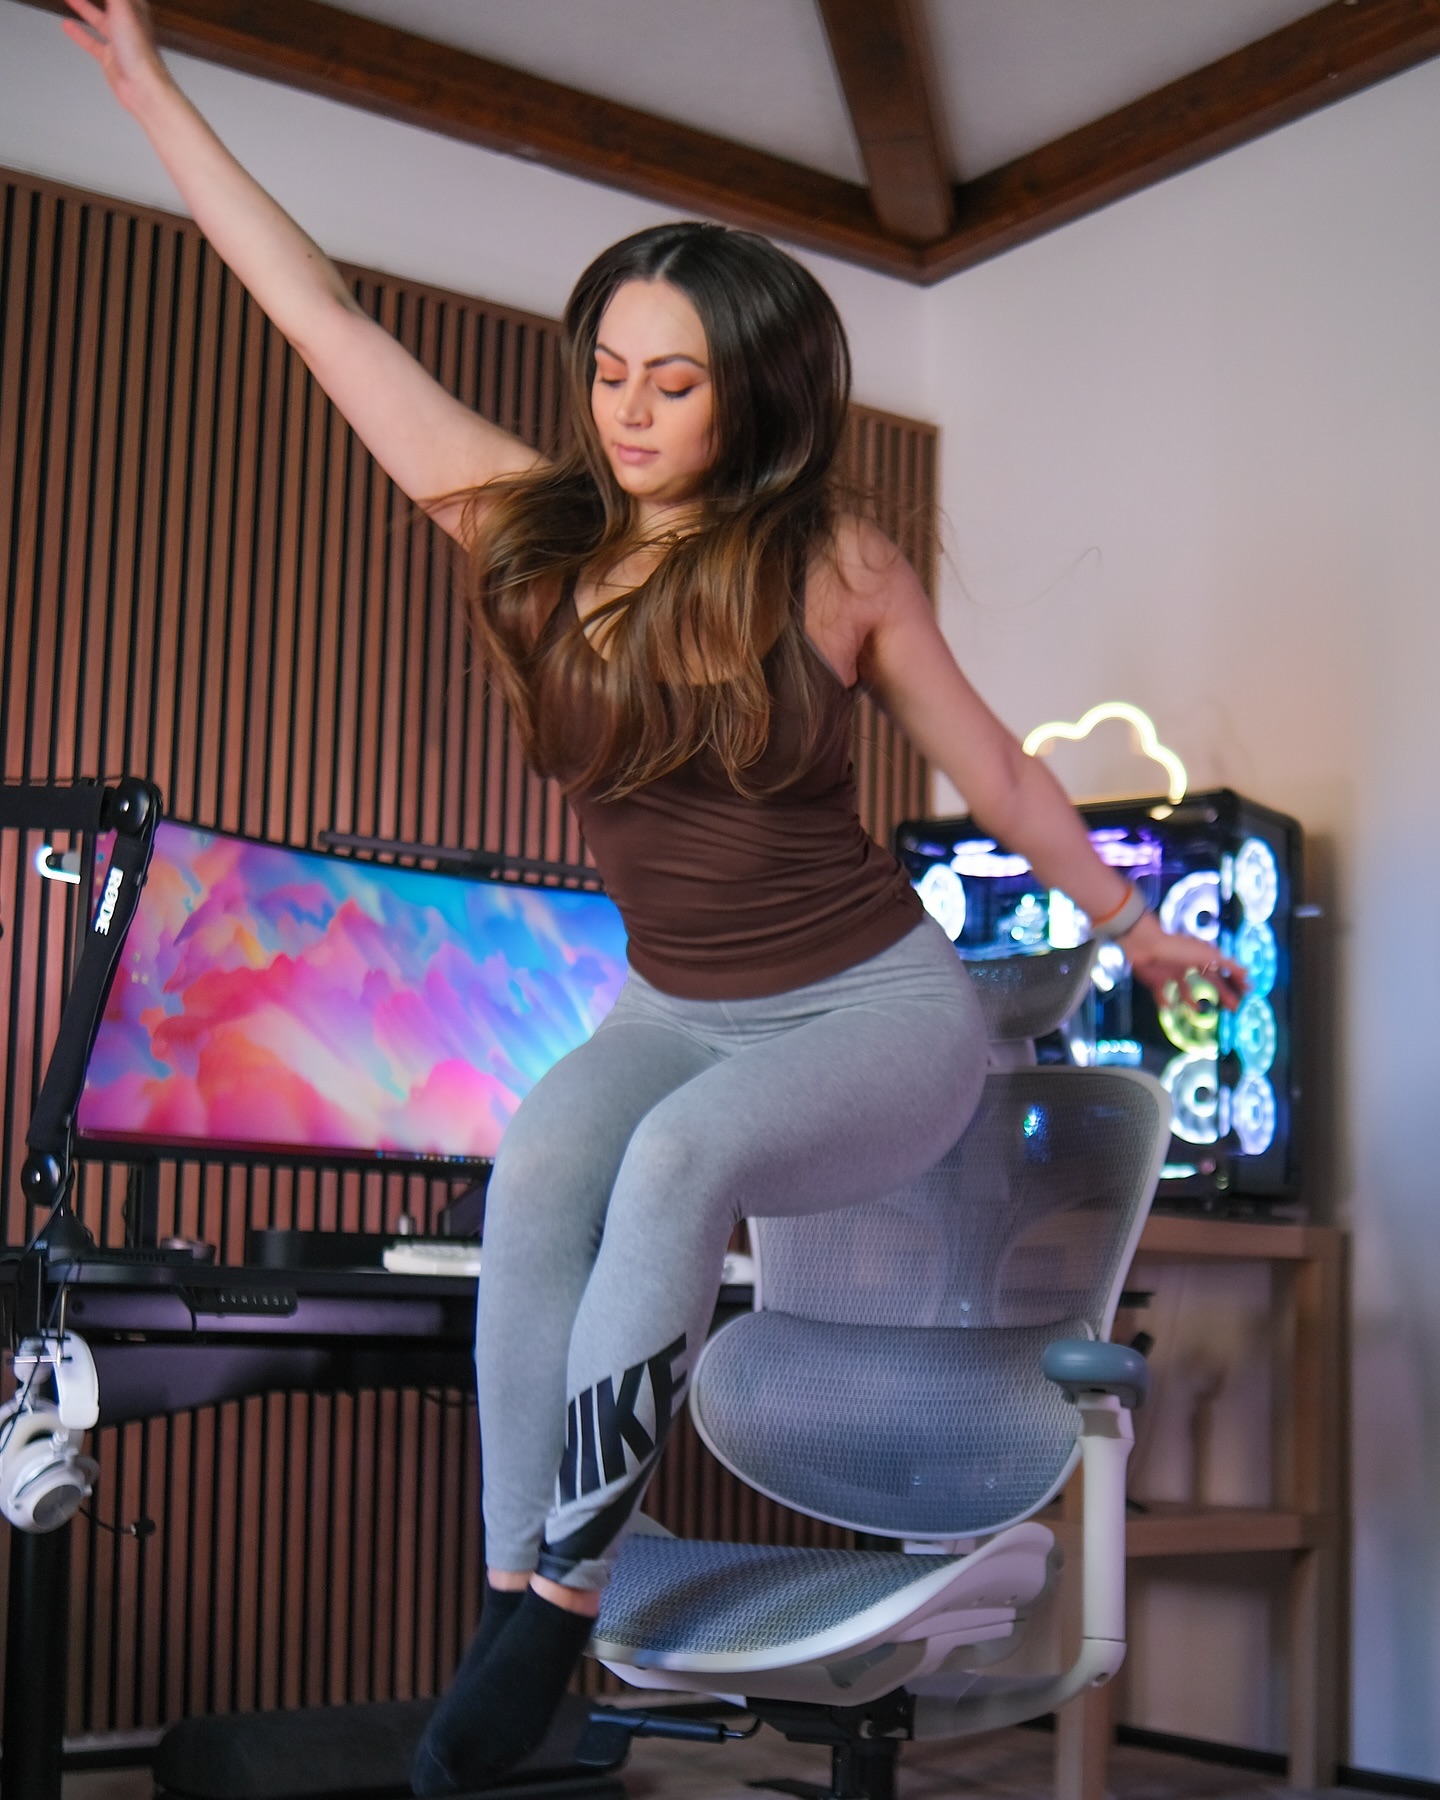 Jumping into the weekend like … 😁😁😁 Comment below what your plans for the weekend are. I want to finish an oil painting 🖼️ I am painting for the living room. 
#setup #setups #coder #programmer #developer #softwareengineer #gaming #coders #coding #programming